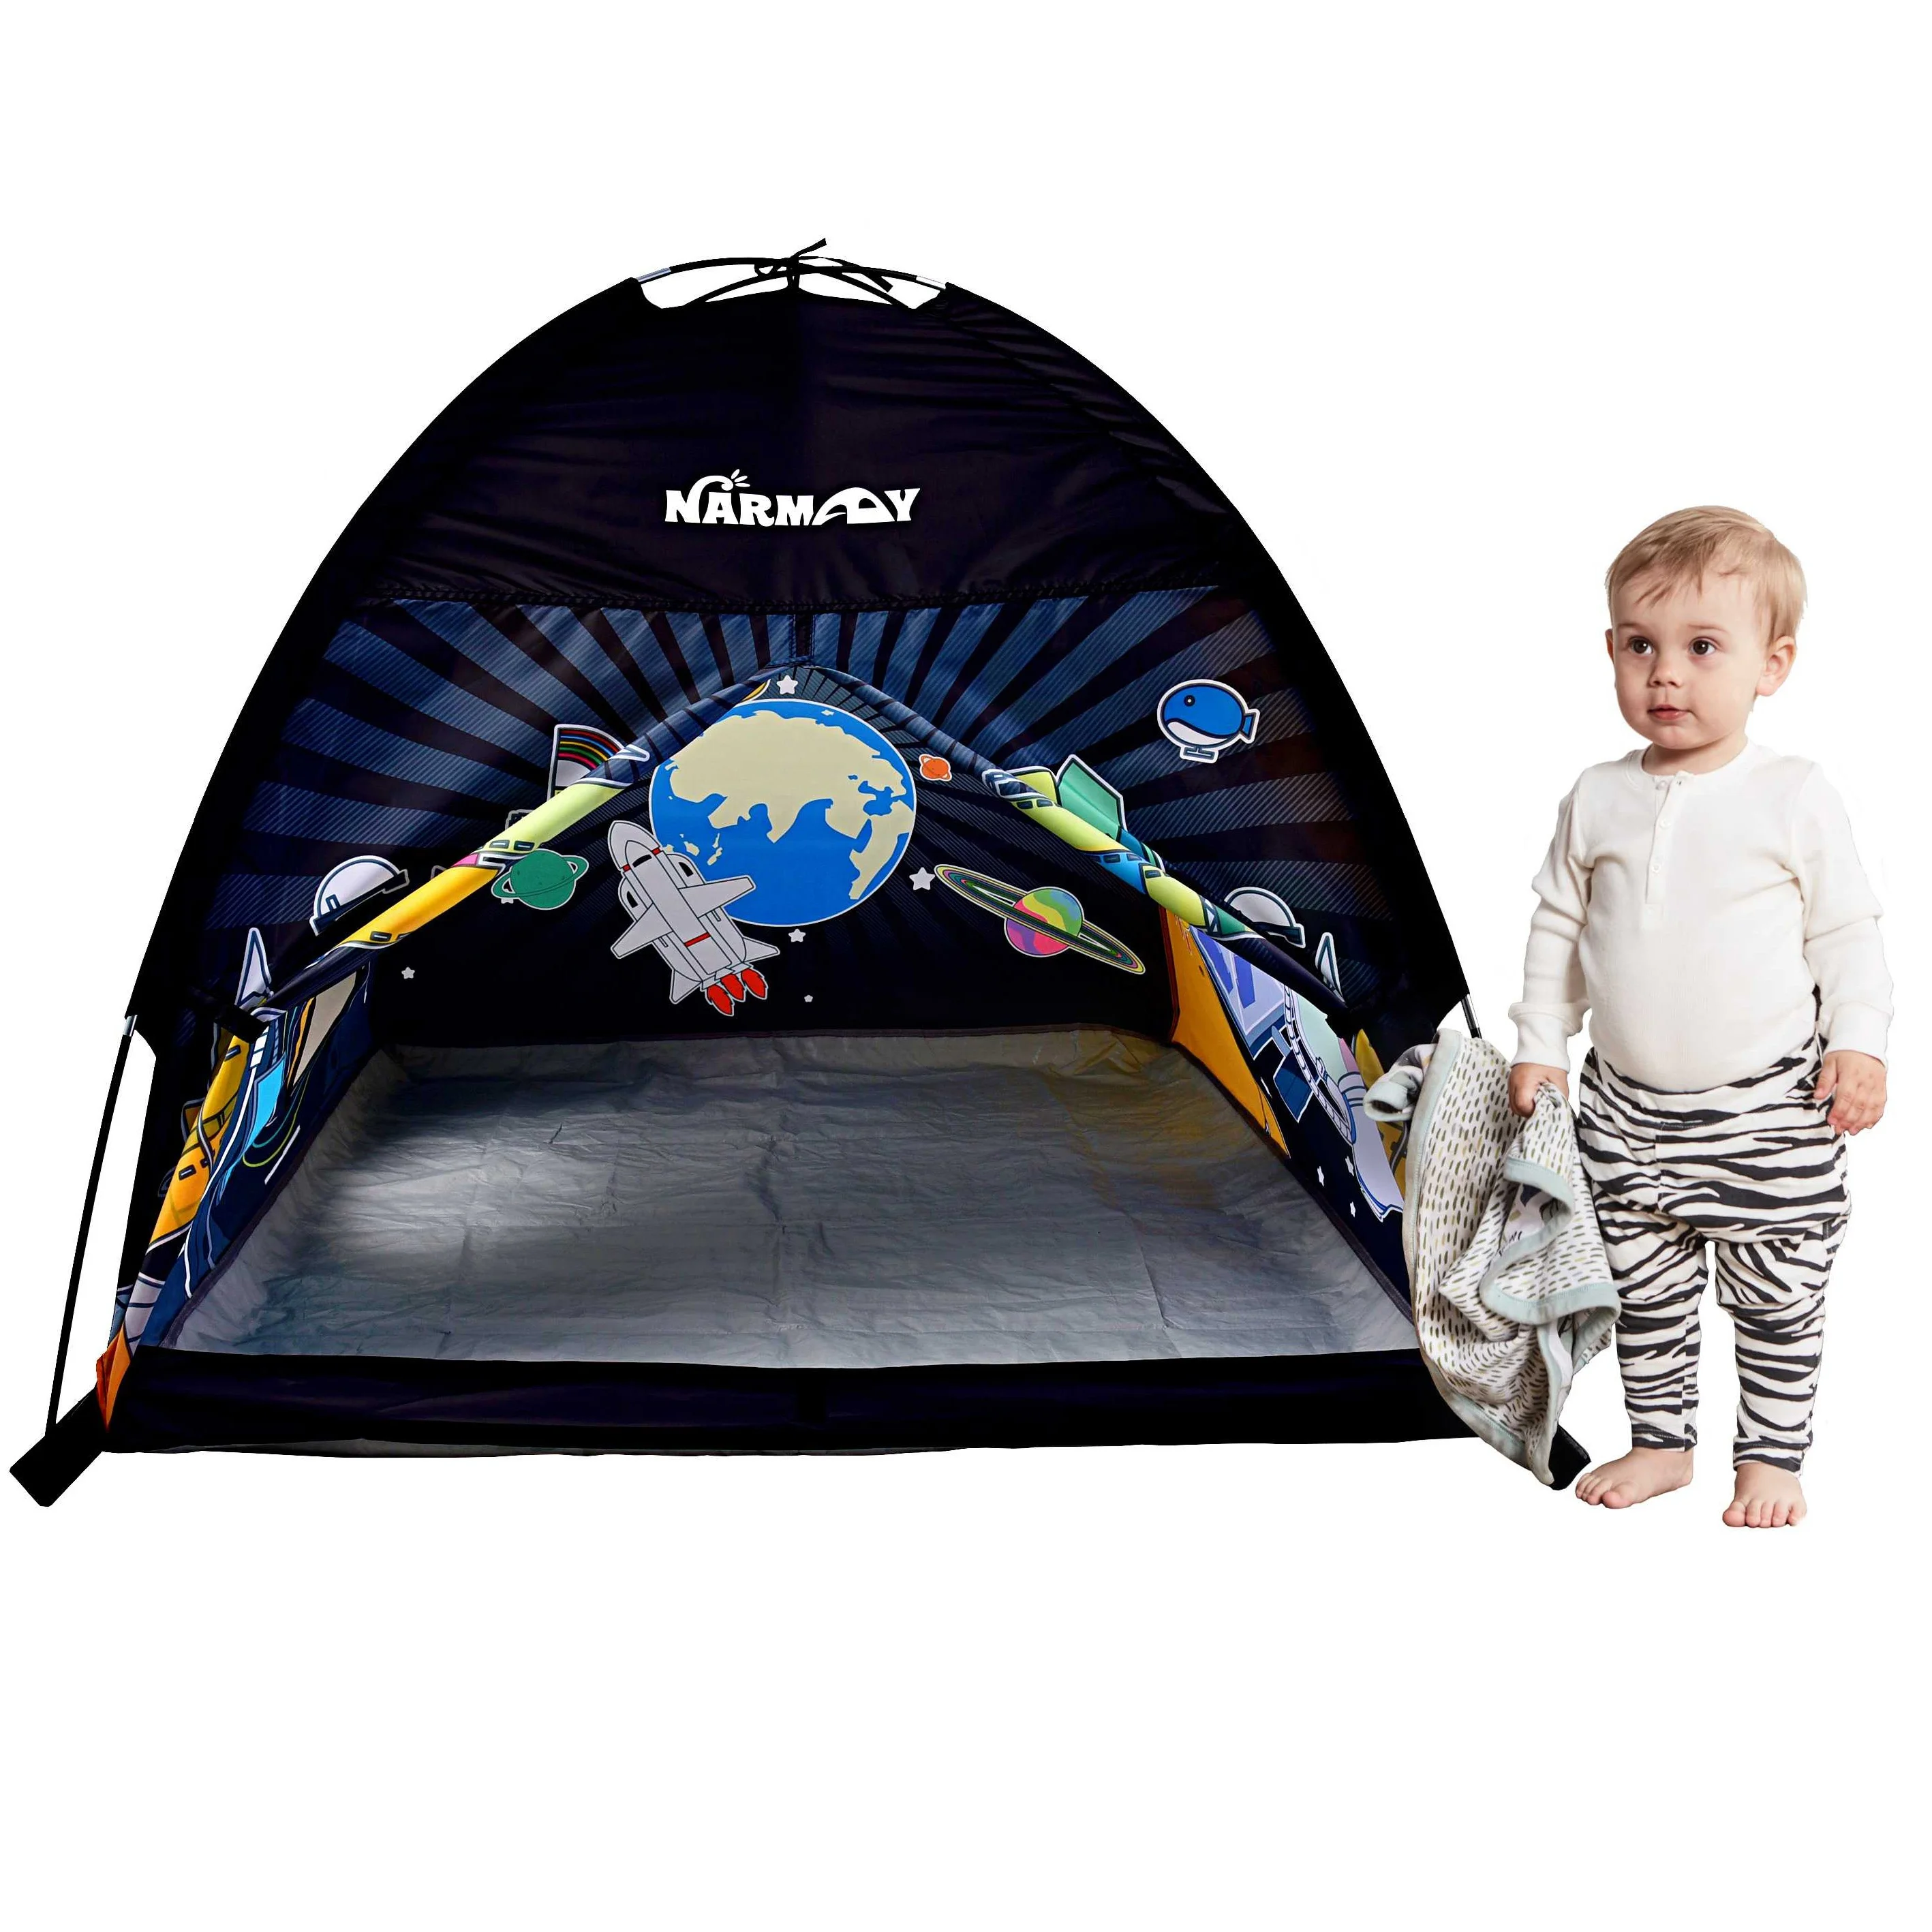 Space World Kids Play Tent Kids Galaxy Dome Tent Playhouse for Boys and Girls Imaginative Gift for Kids Tent for Kids Indoor and Outdoor Fun Play Tent for Kids 